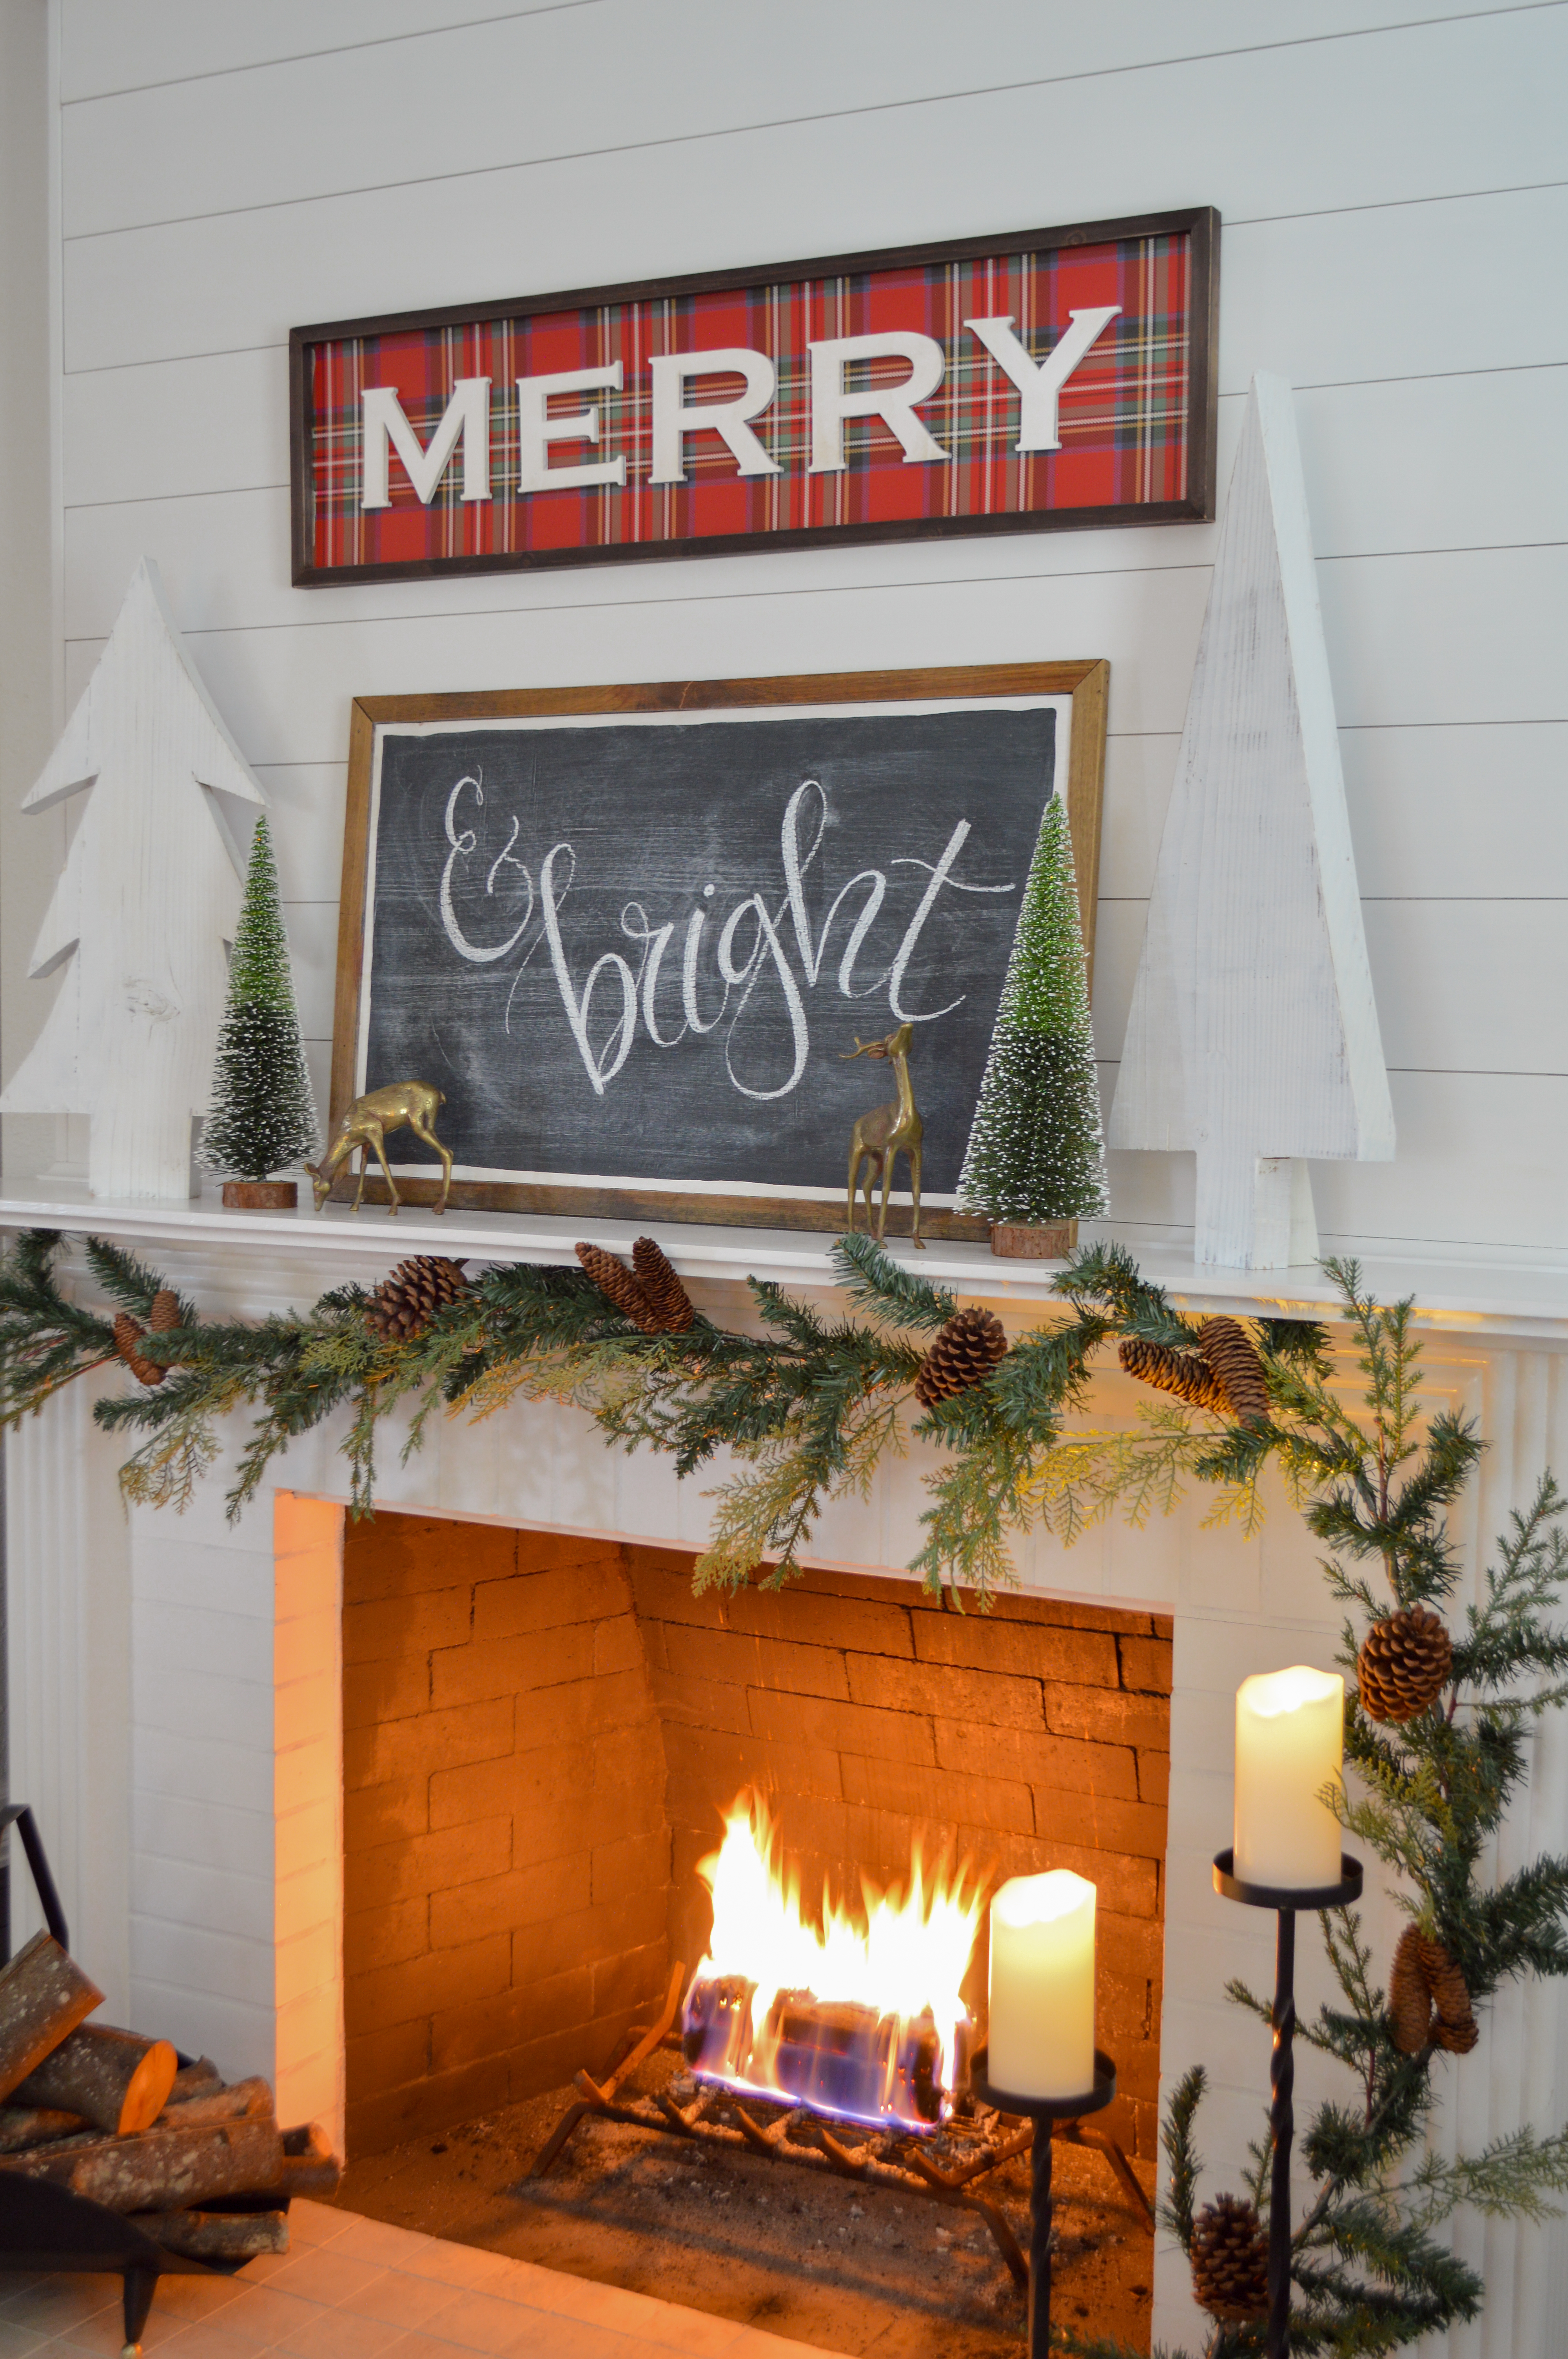 Holiday Housewalk Merry Christmas Home Tour - DIY wood trees, mantle decorating ideas, white shiplap fireplace, MERRY plaid and chalkboard signs, french country chandelier. #holidayhousewalk #christmashometour #cozychristmas #cottagechristmas #farmhousechristmas